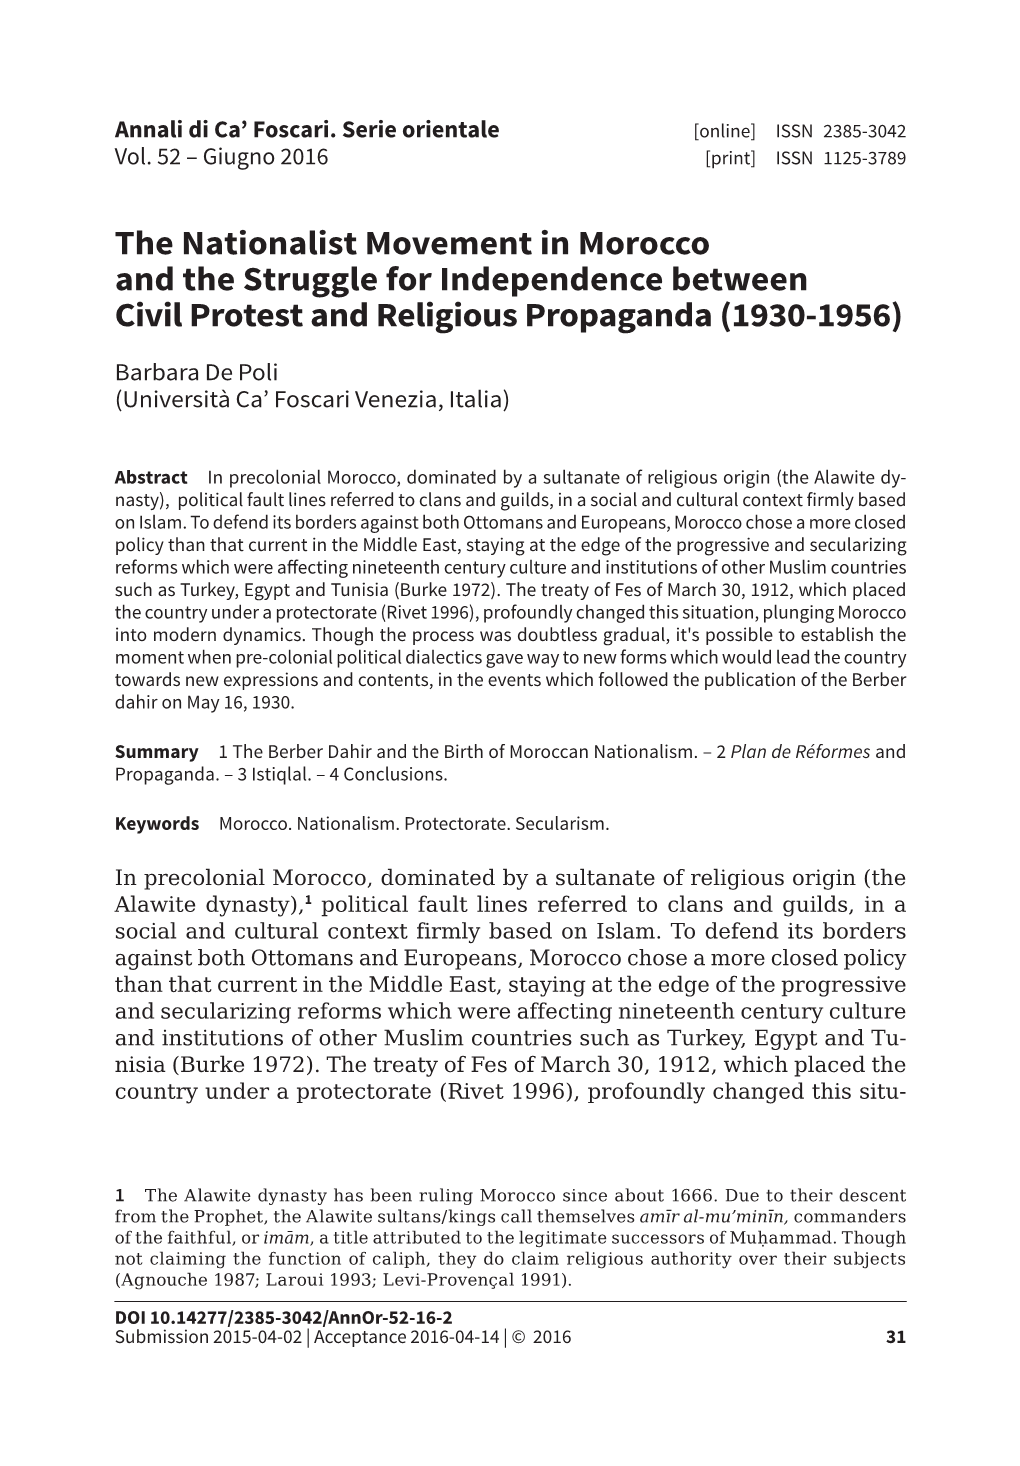 The Nationalist Movement in Morocco and the Struggle for Independence Between Civil Protest and Religious Propaganda (1930-1956)